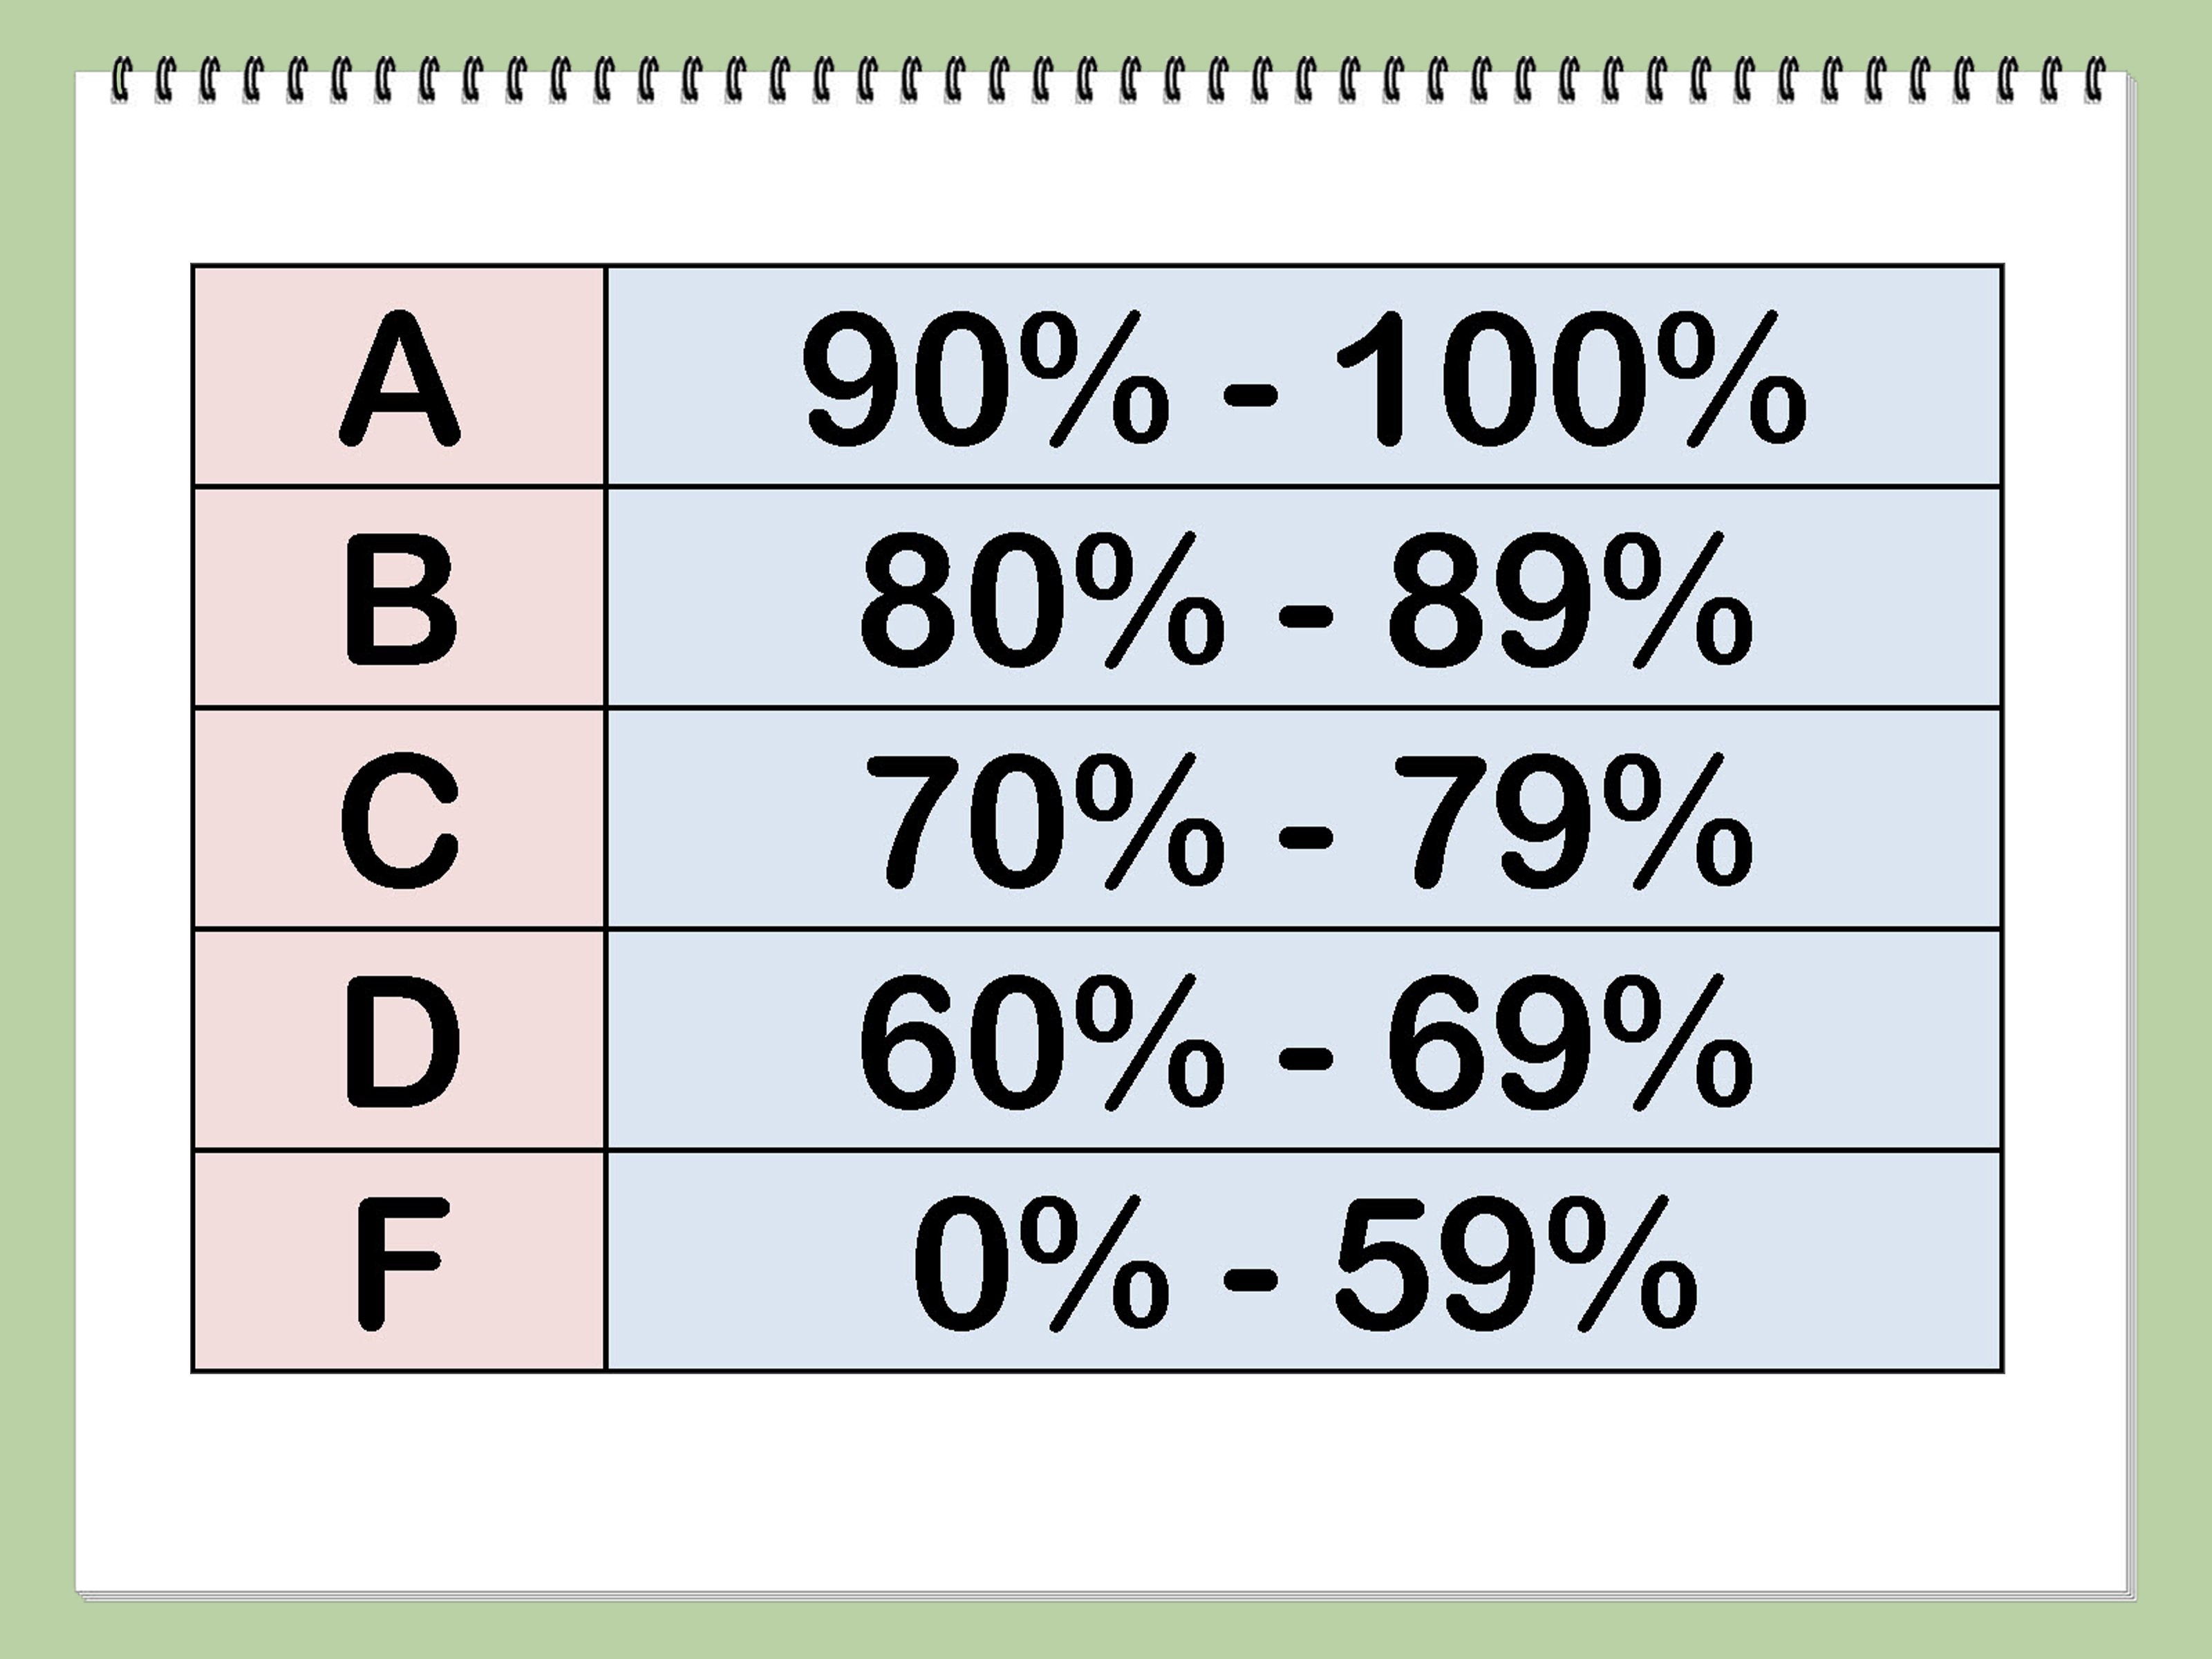 byui grading percentages